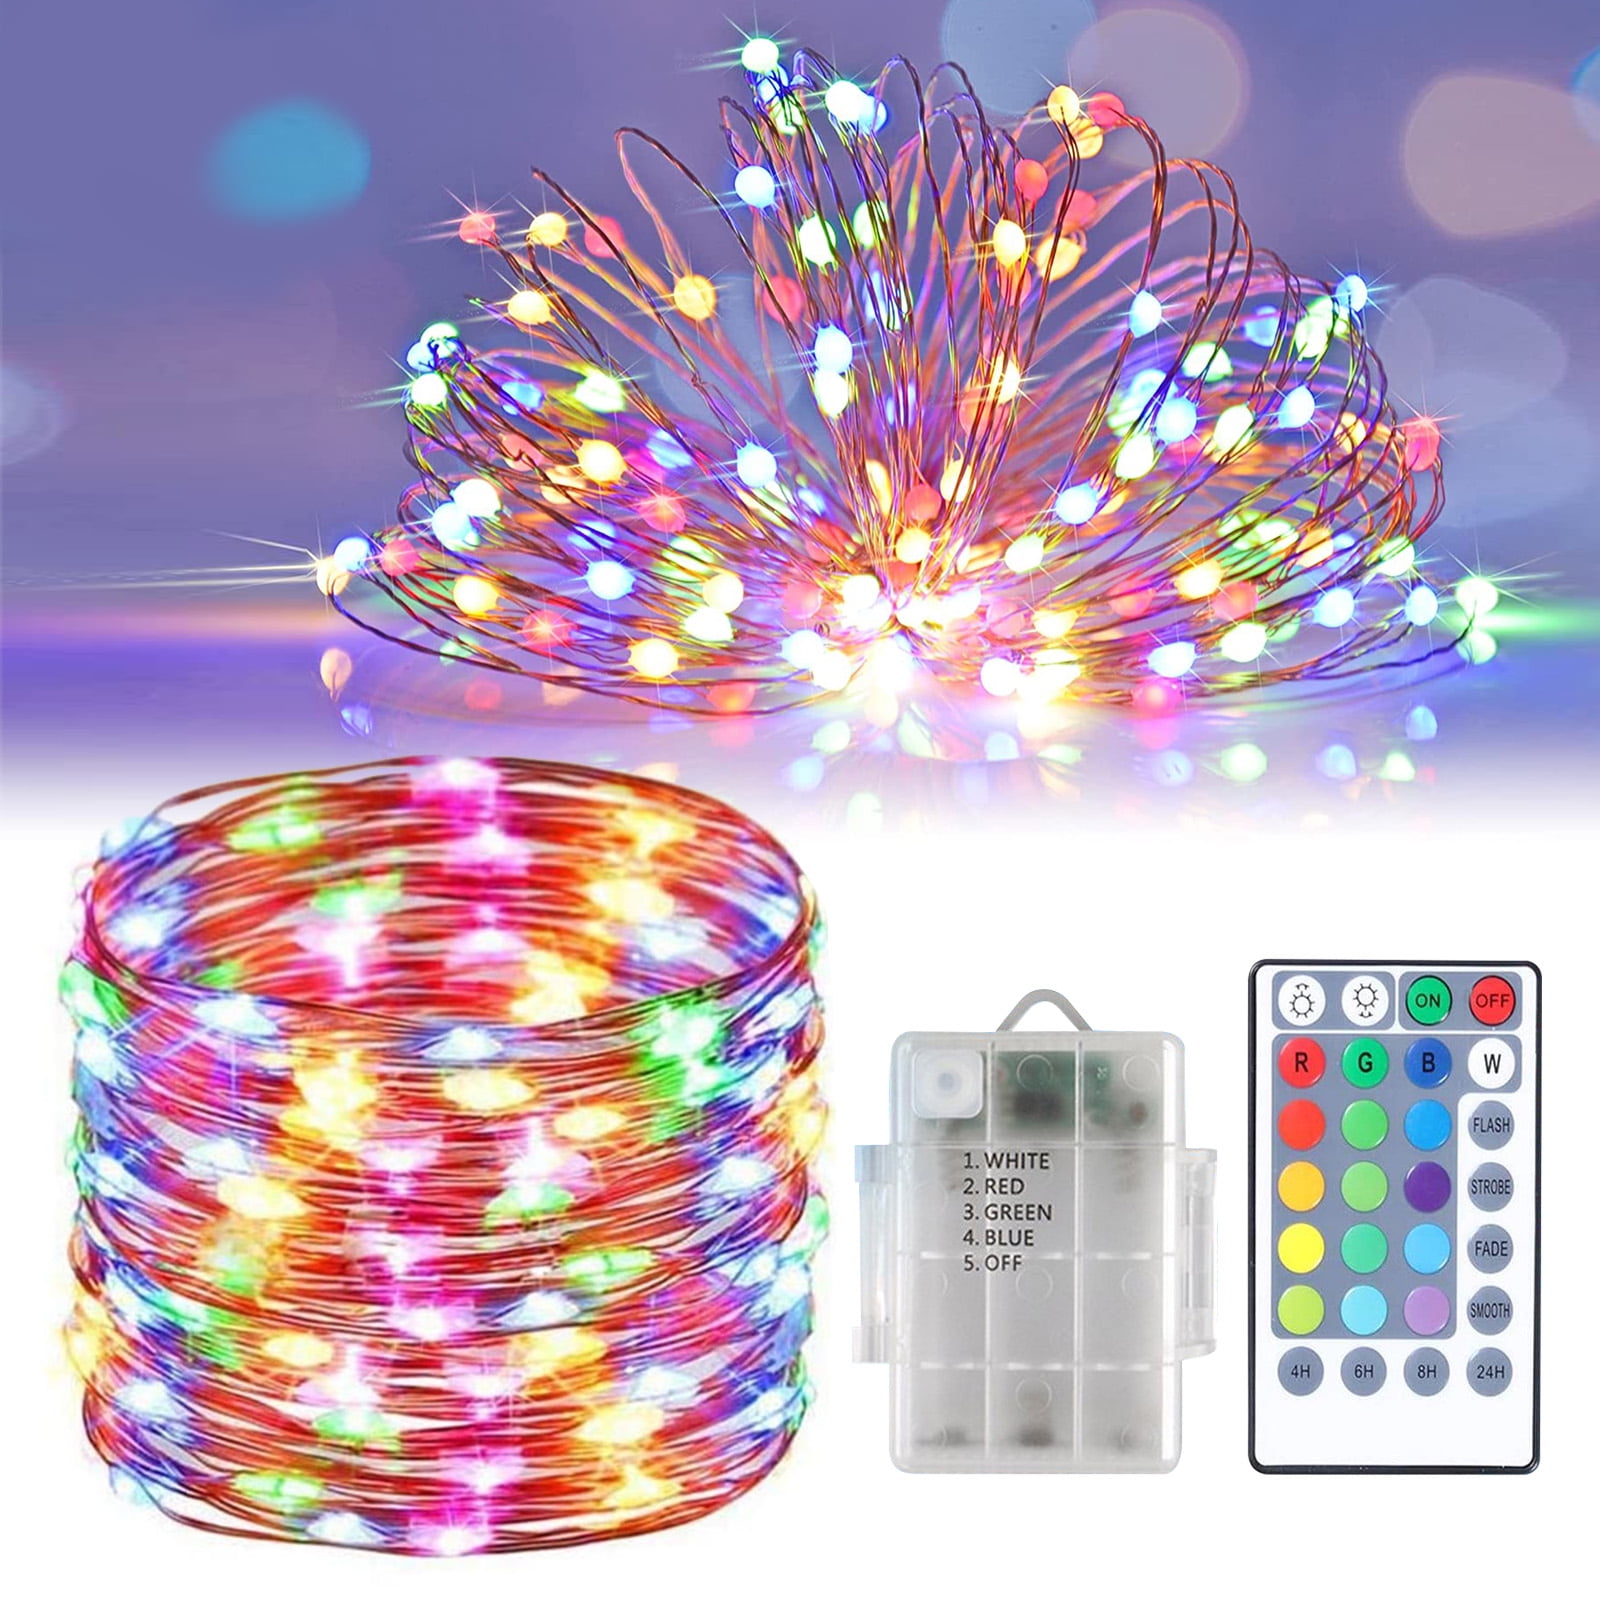 ALL RANGE LED CHASER LIGHTS CHRISTMAS LIGHTS IN/OUT DOOR MULTICOLOUR/WARM/COLD 